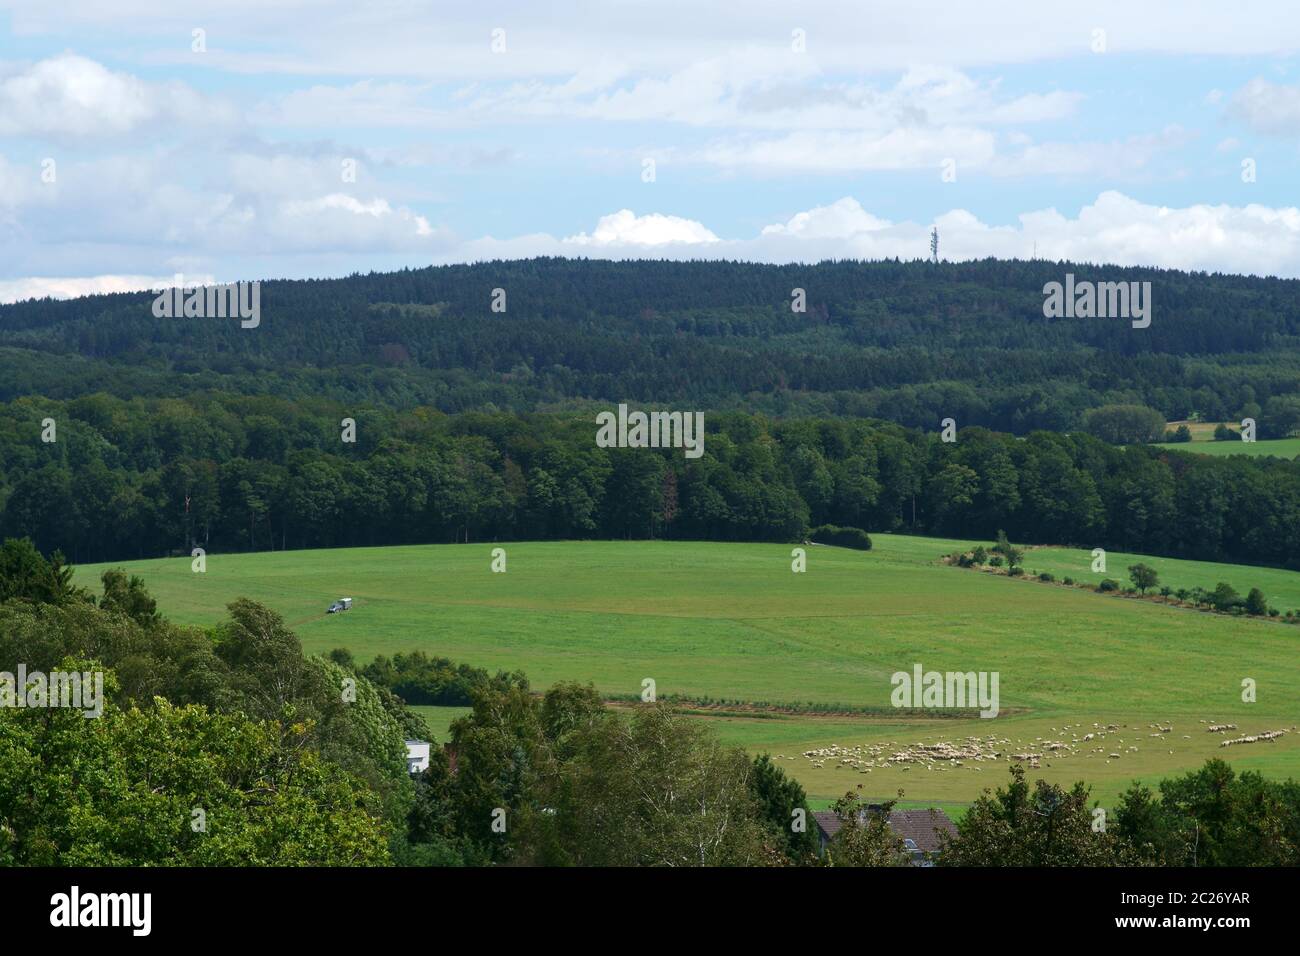 Sheep grazing in a valley in Taunusstein with mountains from the Taunus mountains in the background. Stock Photo